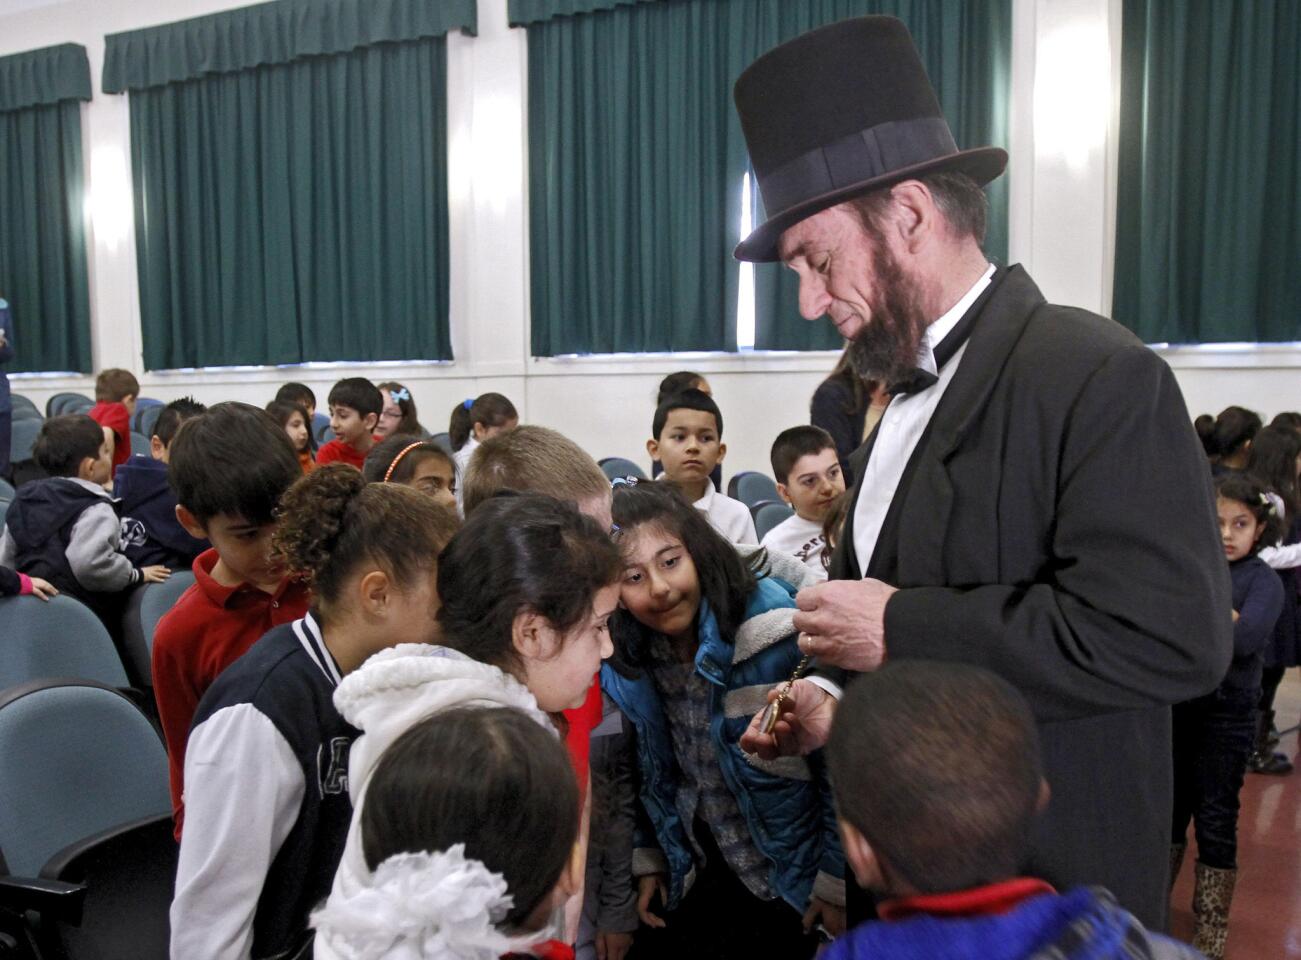 Second graders mingle with actor J.P. Wammack as Abraham Lincoln after he spoke at Marshall Elementary School in Glendale on Wednesday, Feb. 5, 2014. Wammack, as the 16th president, gave a 30 minute talk about the history of the president we all know as Honest Abe.